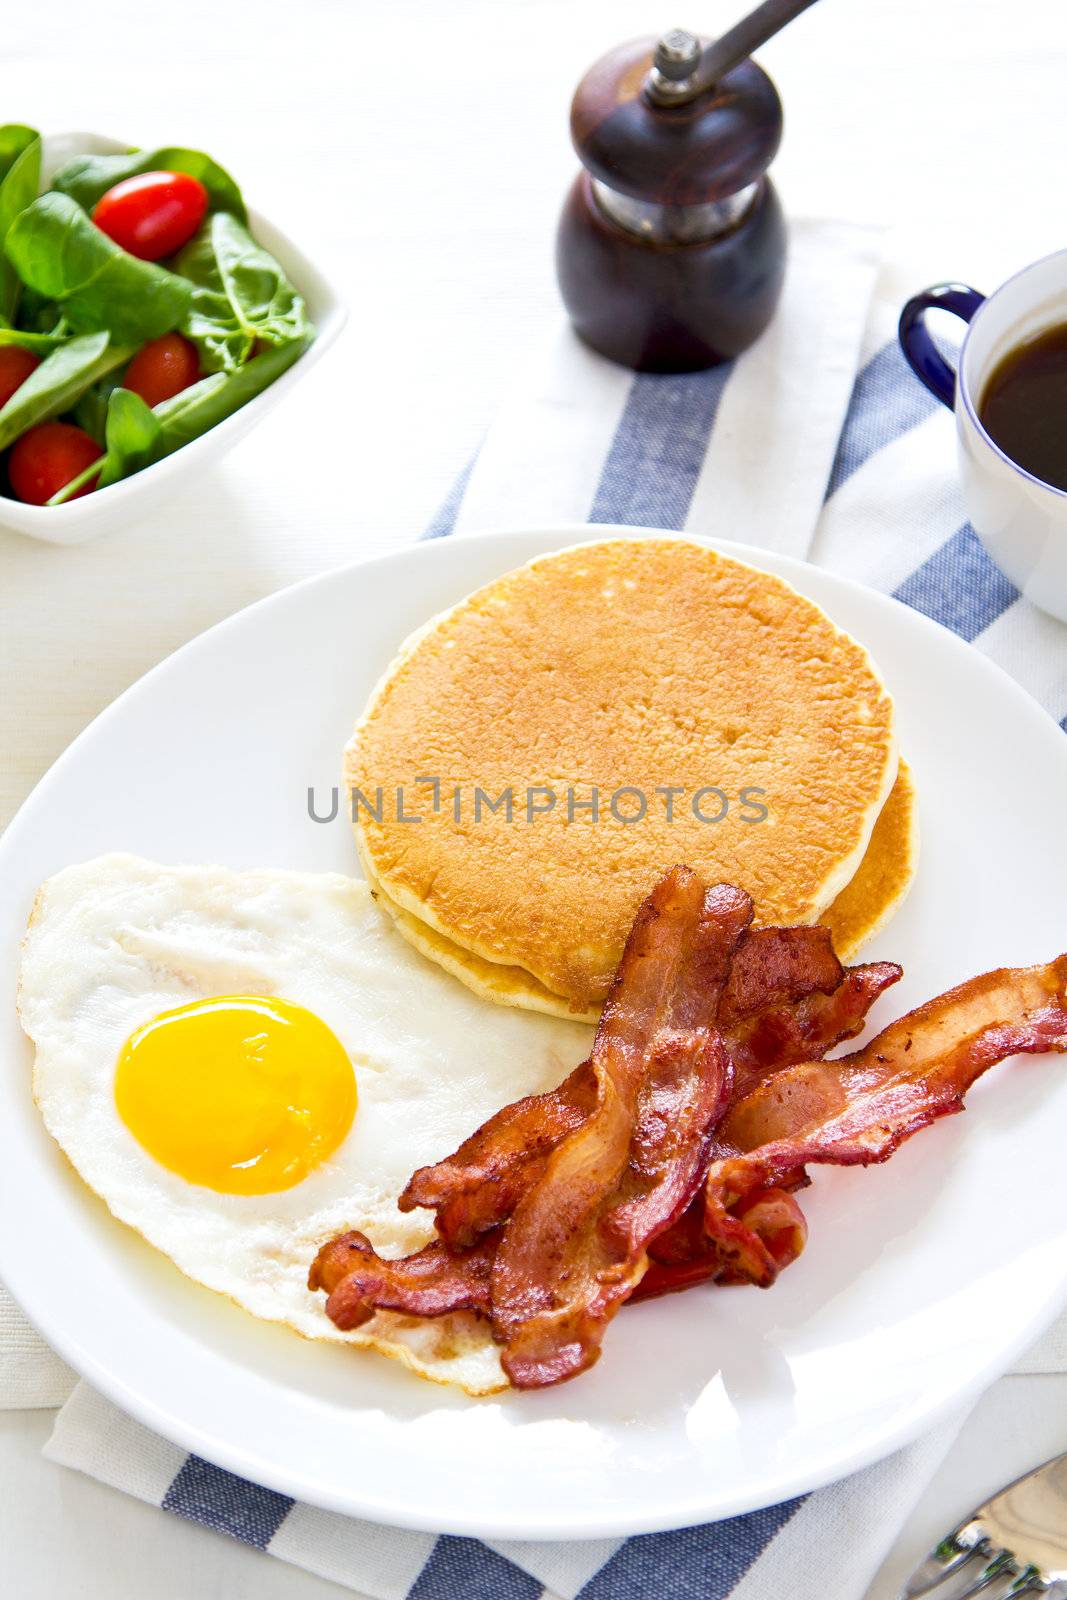 Pancake with Bacon and fried egg by vanillaechoes